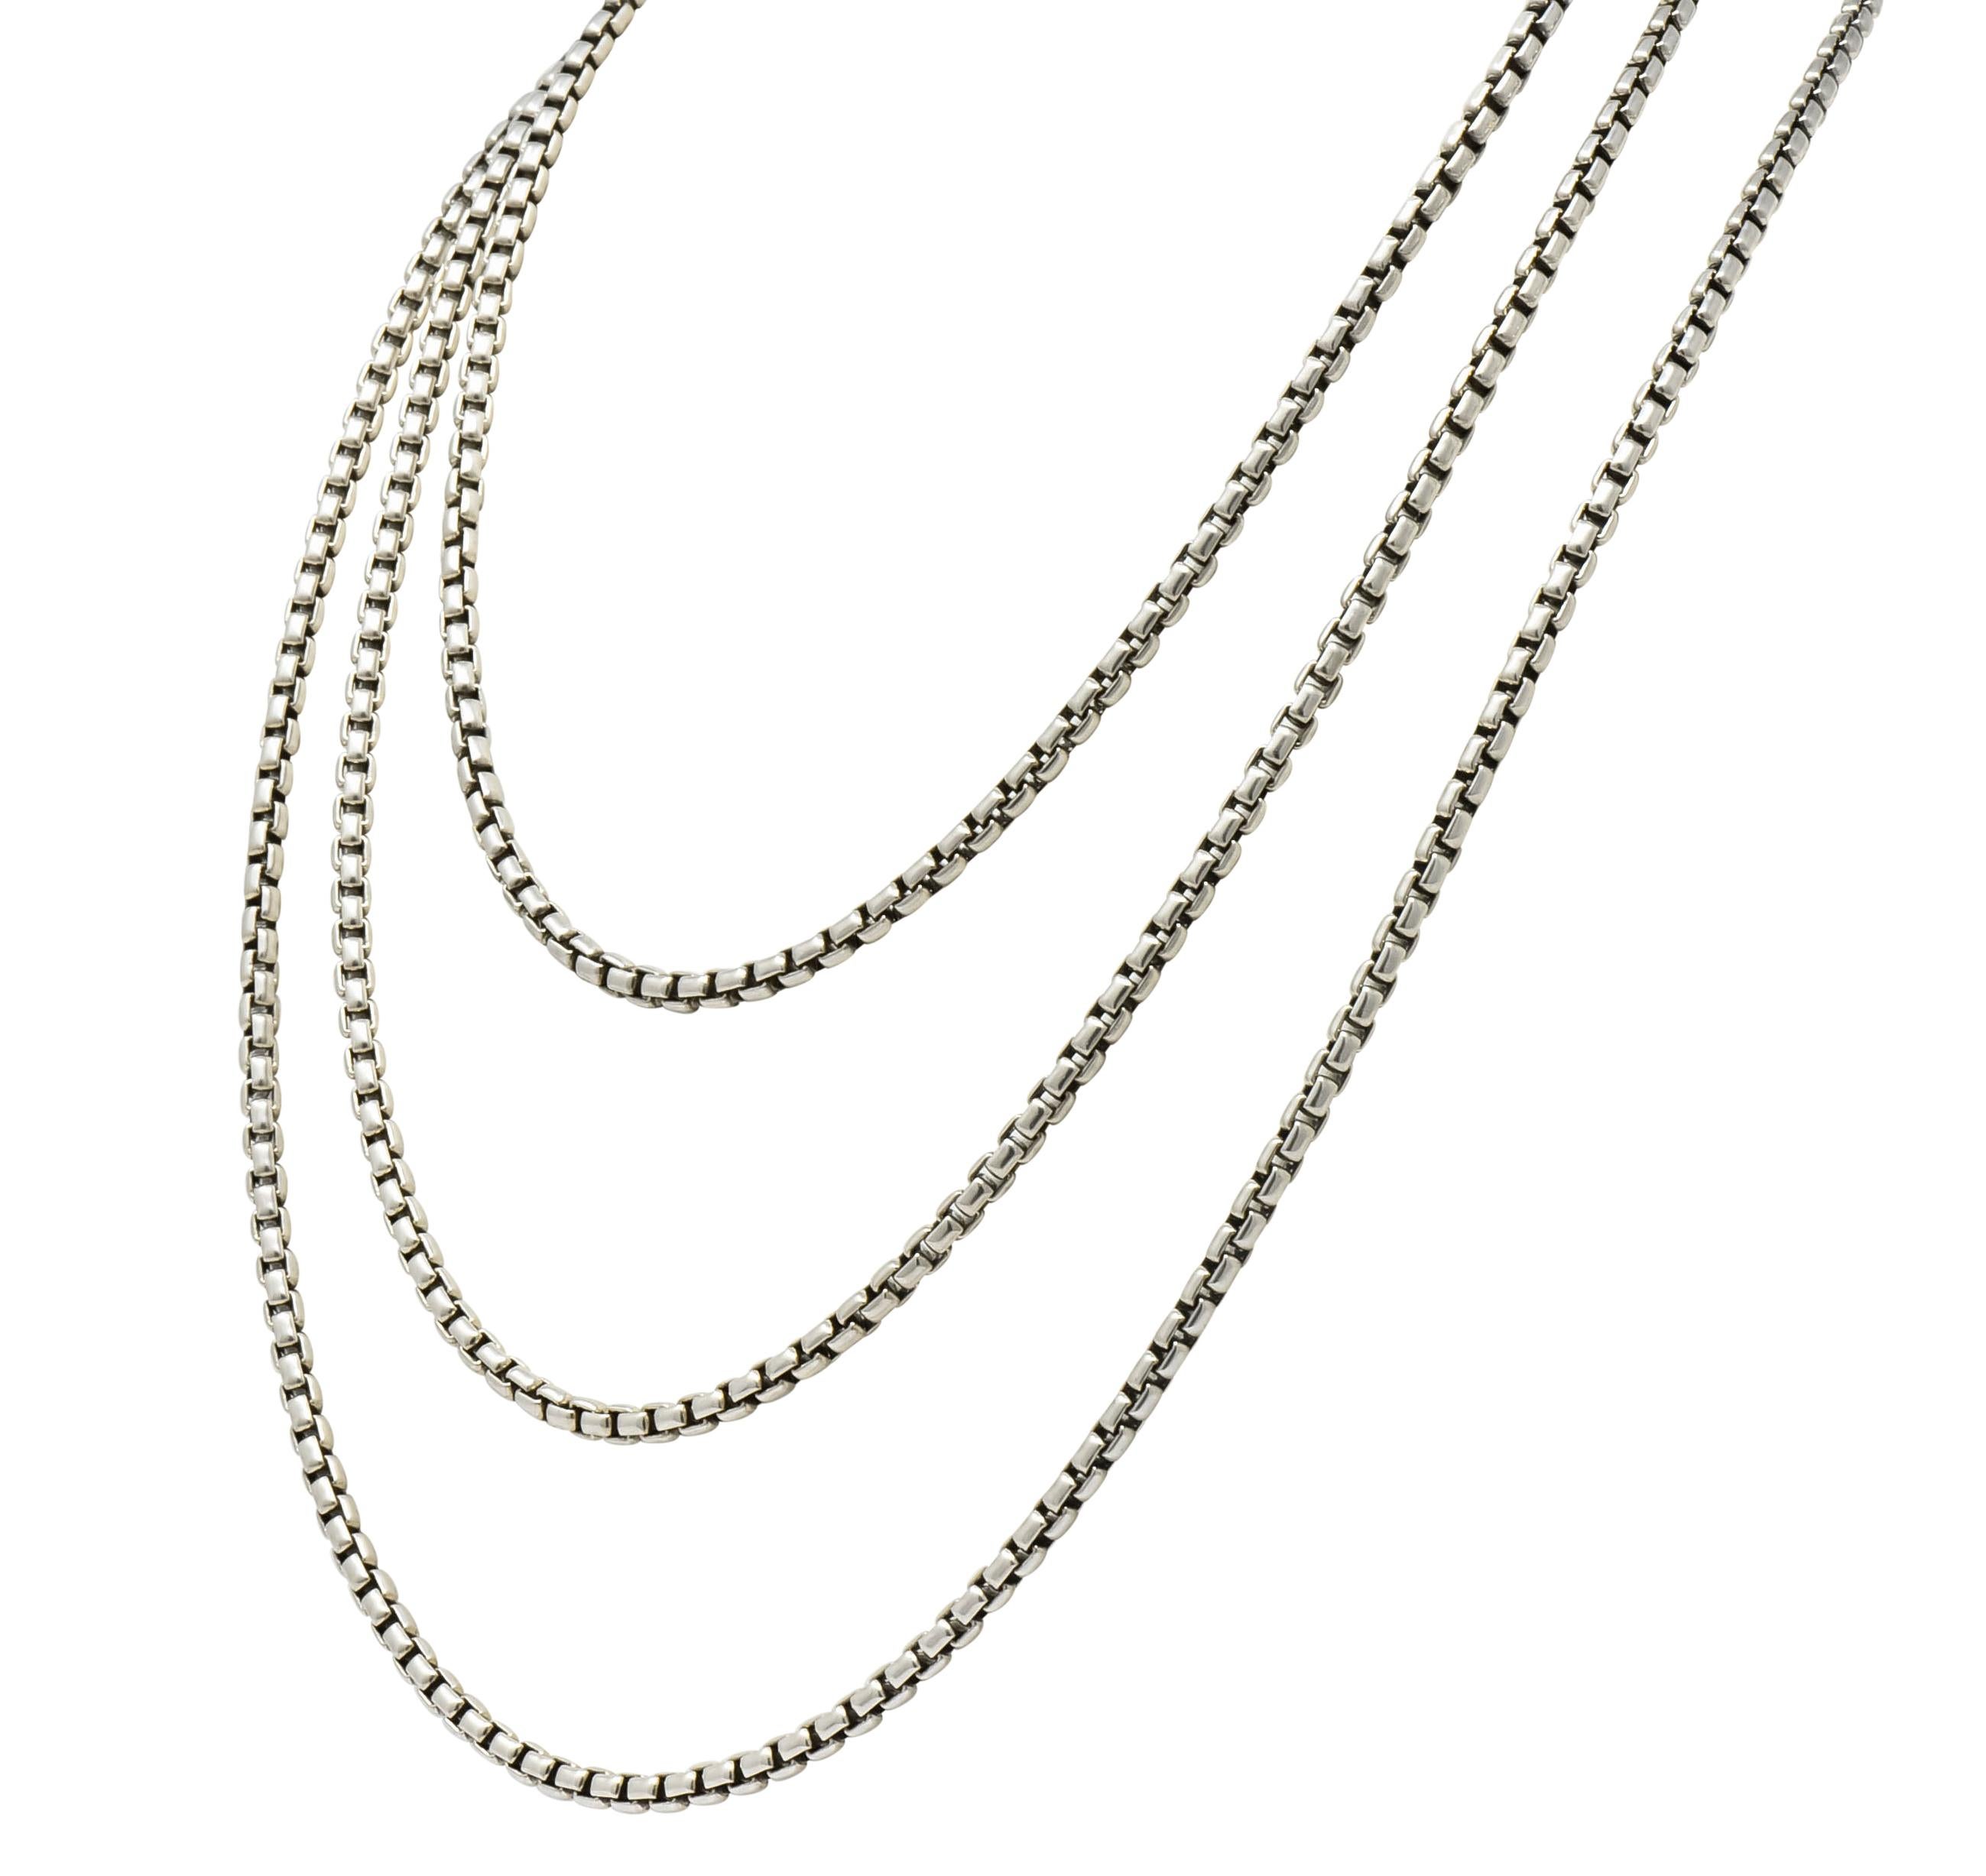 Box style long chain necklace comprised of polished rectangular silver links

Accented by a 14 karat gold logo link, pierced DY for David Yurman

Completed by lobster clasp

With maker's mark and logo link is stamped 585 and 925 for 14 karat gold